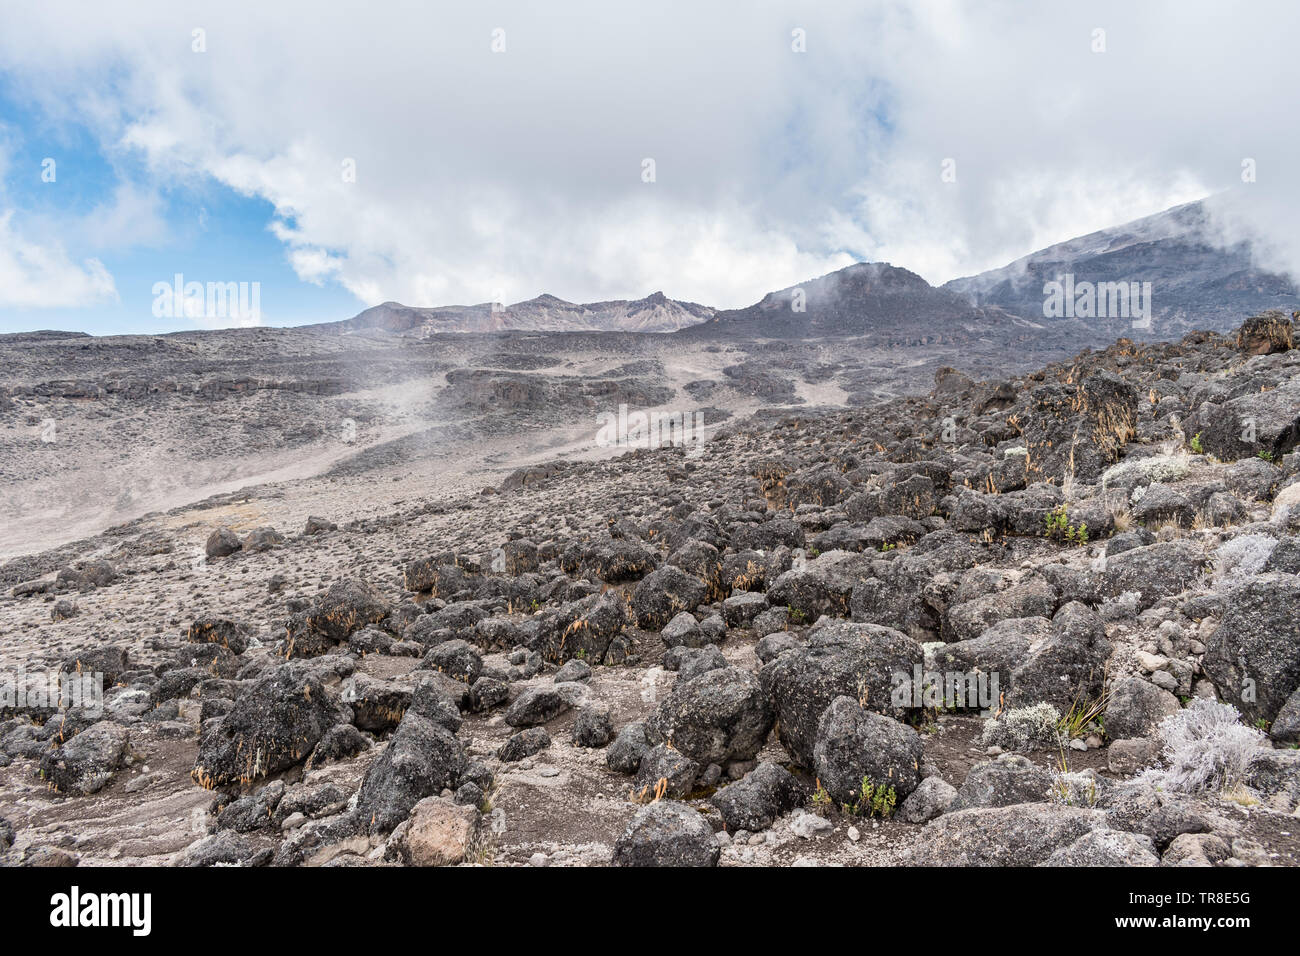 Hundreds of igneous volcanic rocks scattered across the alpine desert zone landscape of Mount Kilimanjaro, Tanzania, near the Machame hiking route. Stock Photo